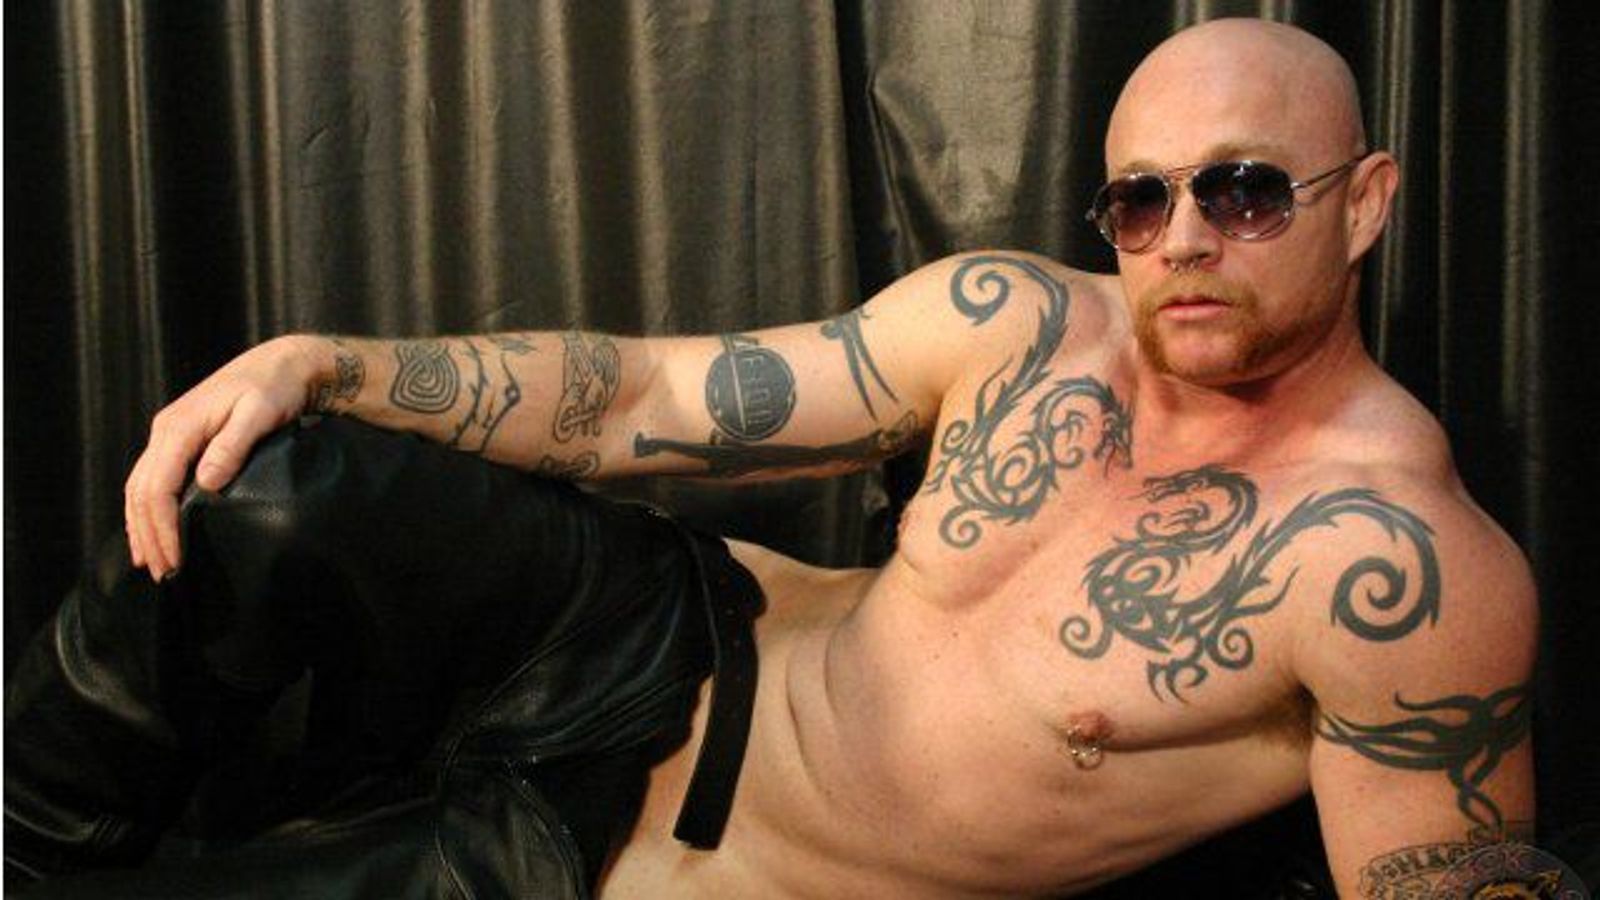 Buck Angel Partners with Stockroom on DVD Distro Deal